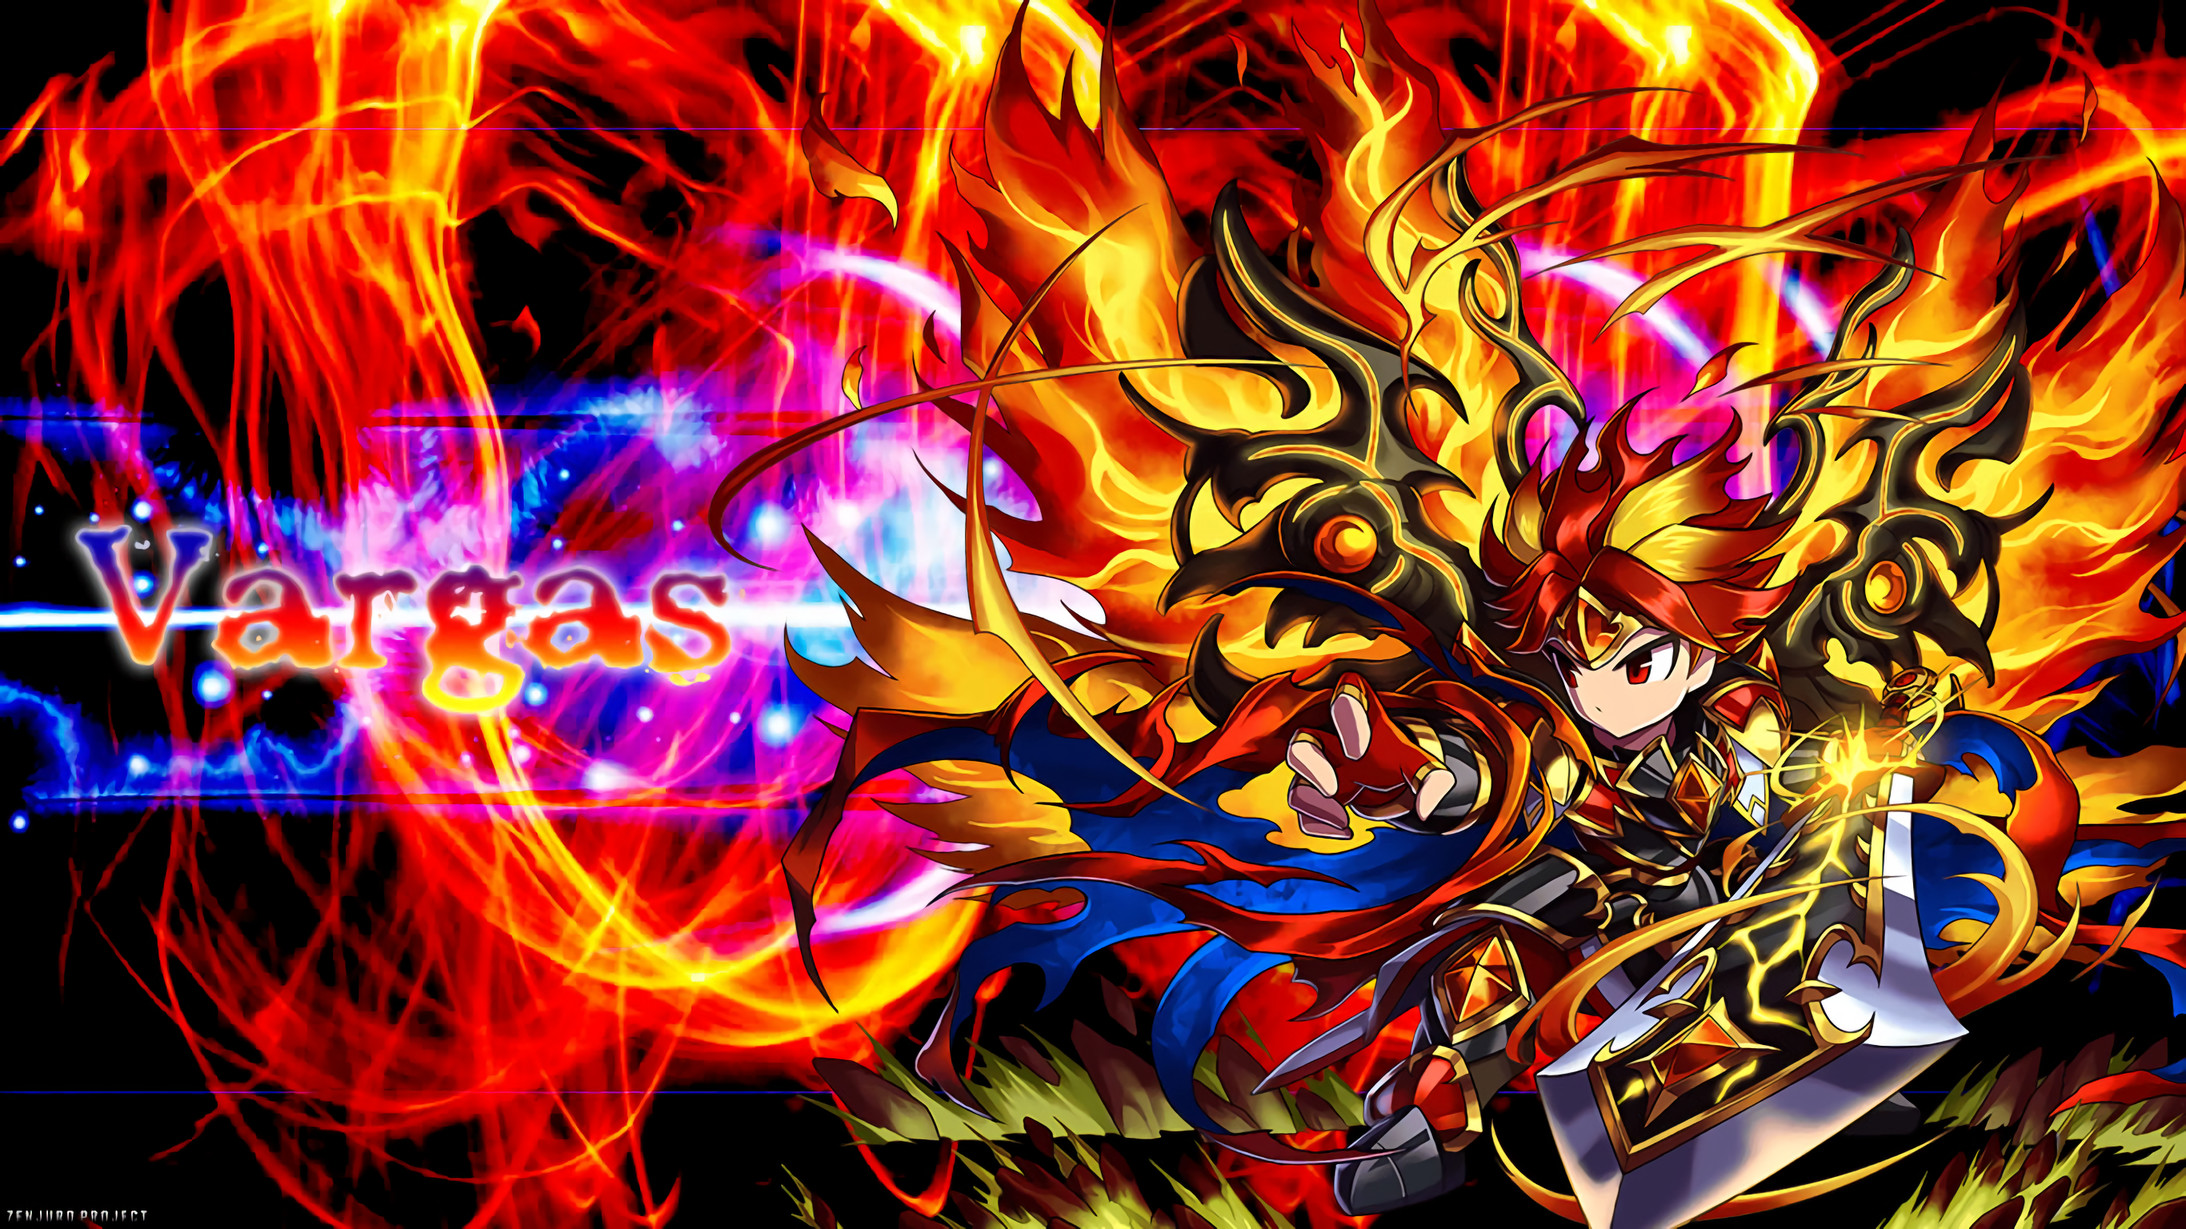 2186x1229 Vargas 7 Stars Wallpaper [Brave Frontier] by 